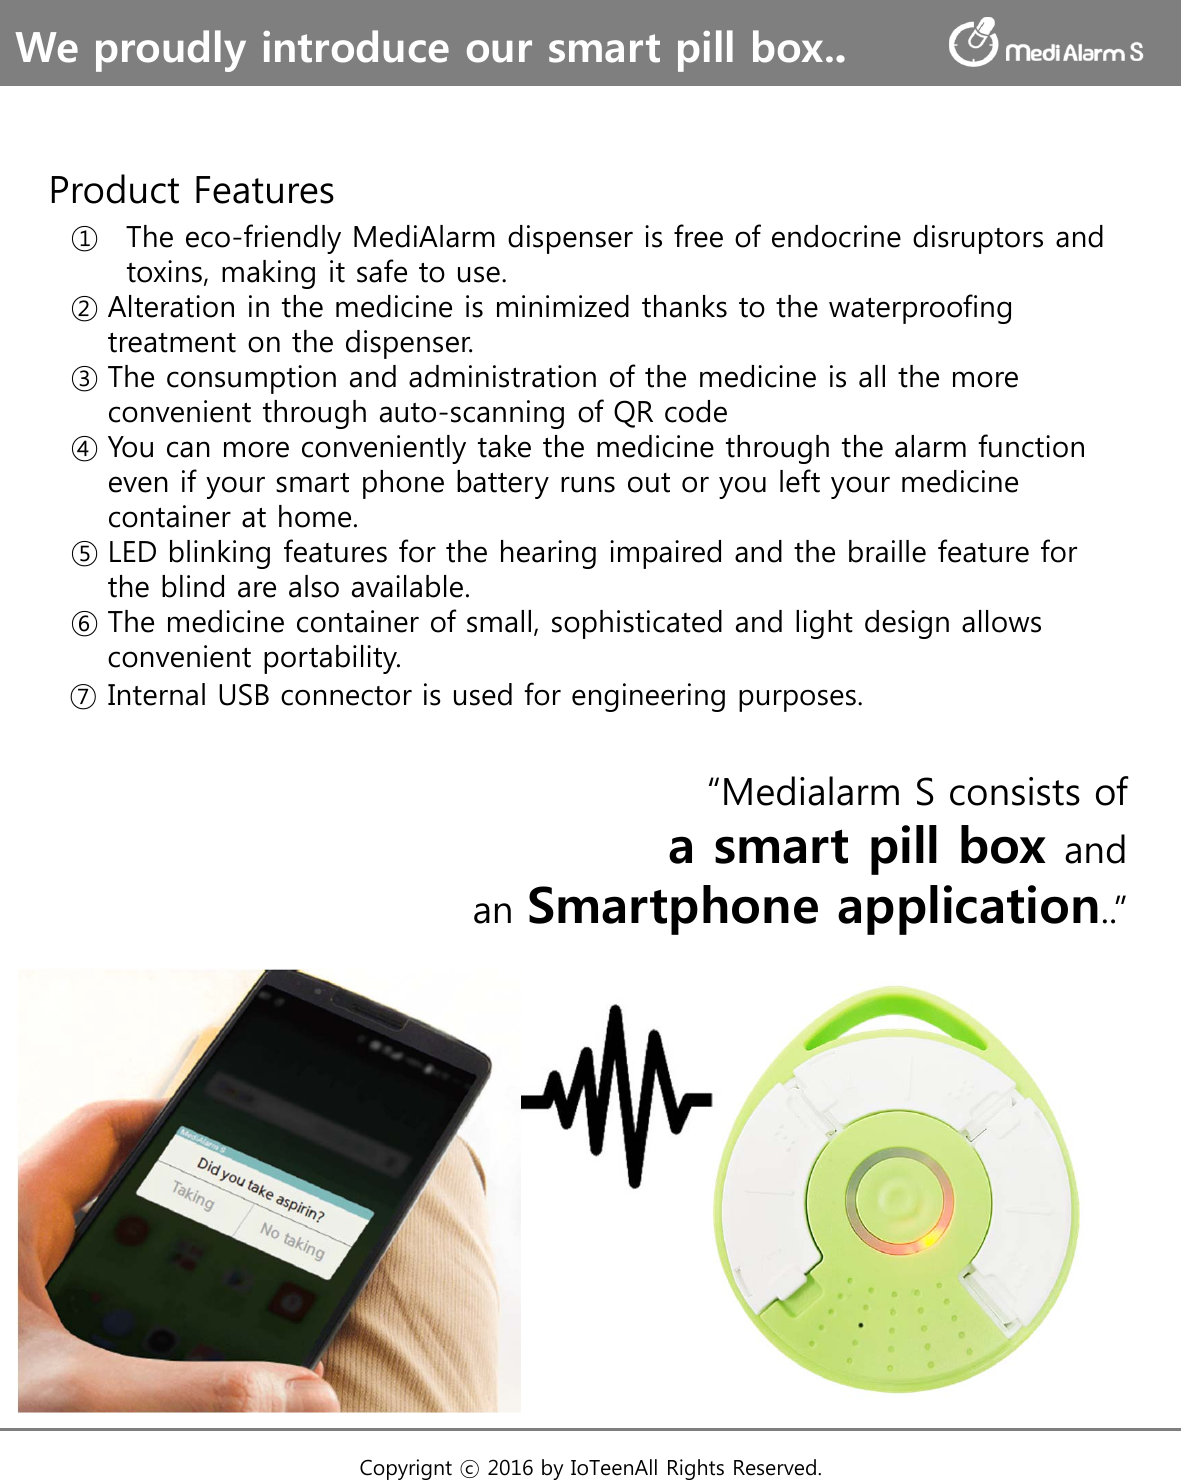 We proudly introduce our smart pill box..Copyrignt ⓒ 2016 by IoTeenAll Rights Reserved. Product Features  ① The eco-friendly MediAlarm dispenser is free of endocrine disruptors and  toxins, making it safe to use.  ② Alteration in the medicine is minimized thanks to the waterproofing  treatment on the dispenser.  ③ The consumption and administration of the medicine is all the more  convenient through auto-scanning of QR code  ④ You can more conveniently take the medicine through the alarm function  even if your smart phone battery runs out or you left your medicine  container at home.  ⑤ LED blinking features for the hearing impaired and the braille feature for  the blind are also available.  ⑥ The medicine container of small, sophisticated and light design allows  convenient portability.  ⑦ Internal USB connector is used for engineering purposes.“Medialarm S consists ofa smart pill box andan Smartphone application..”